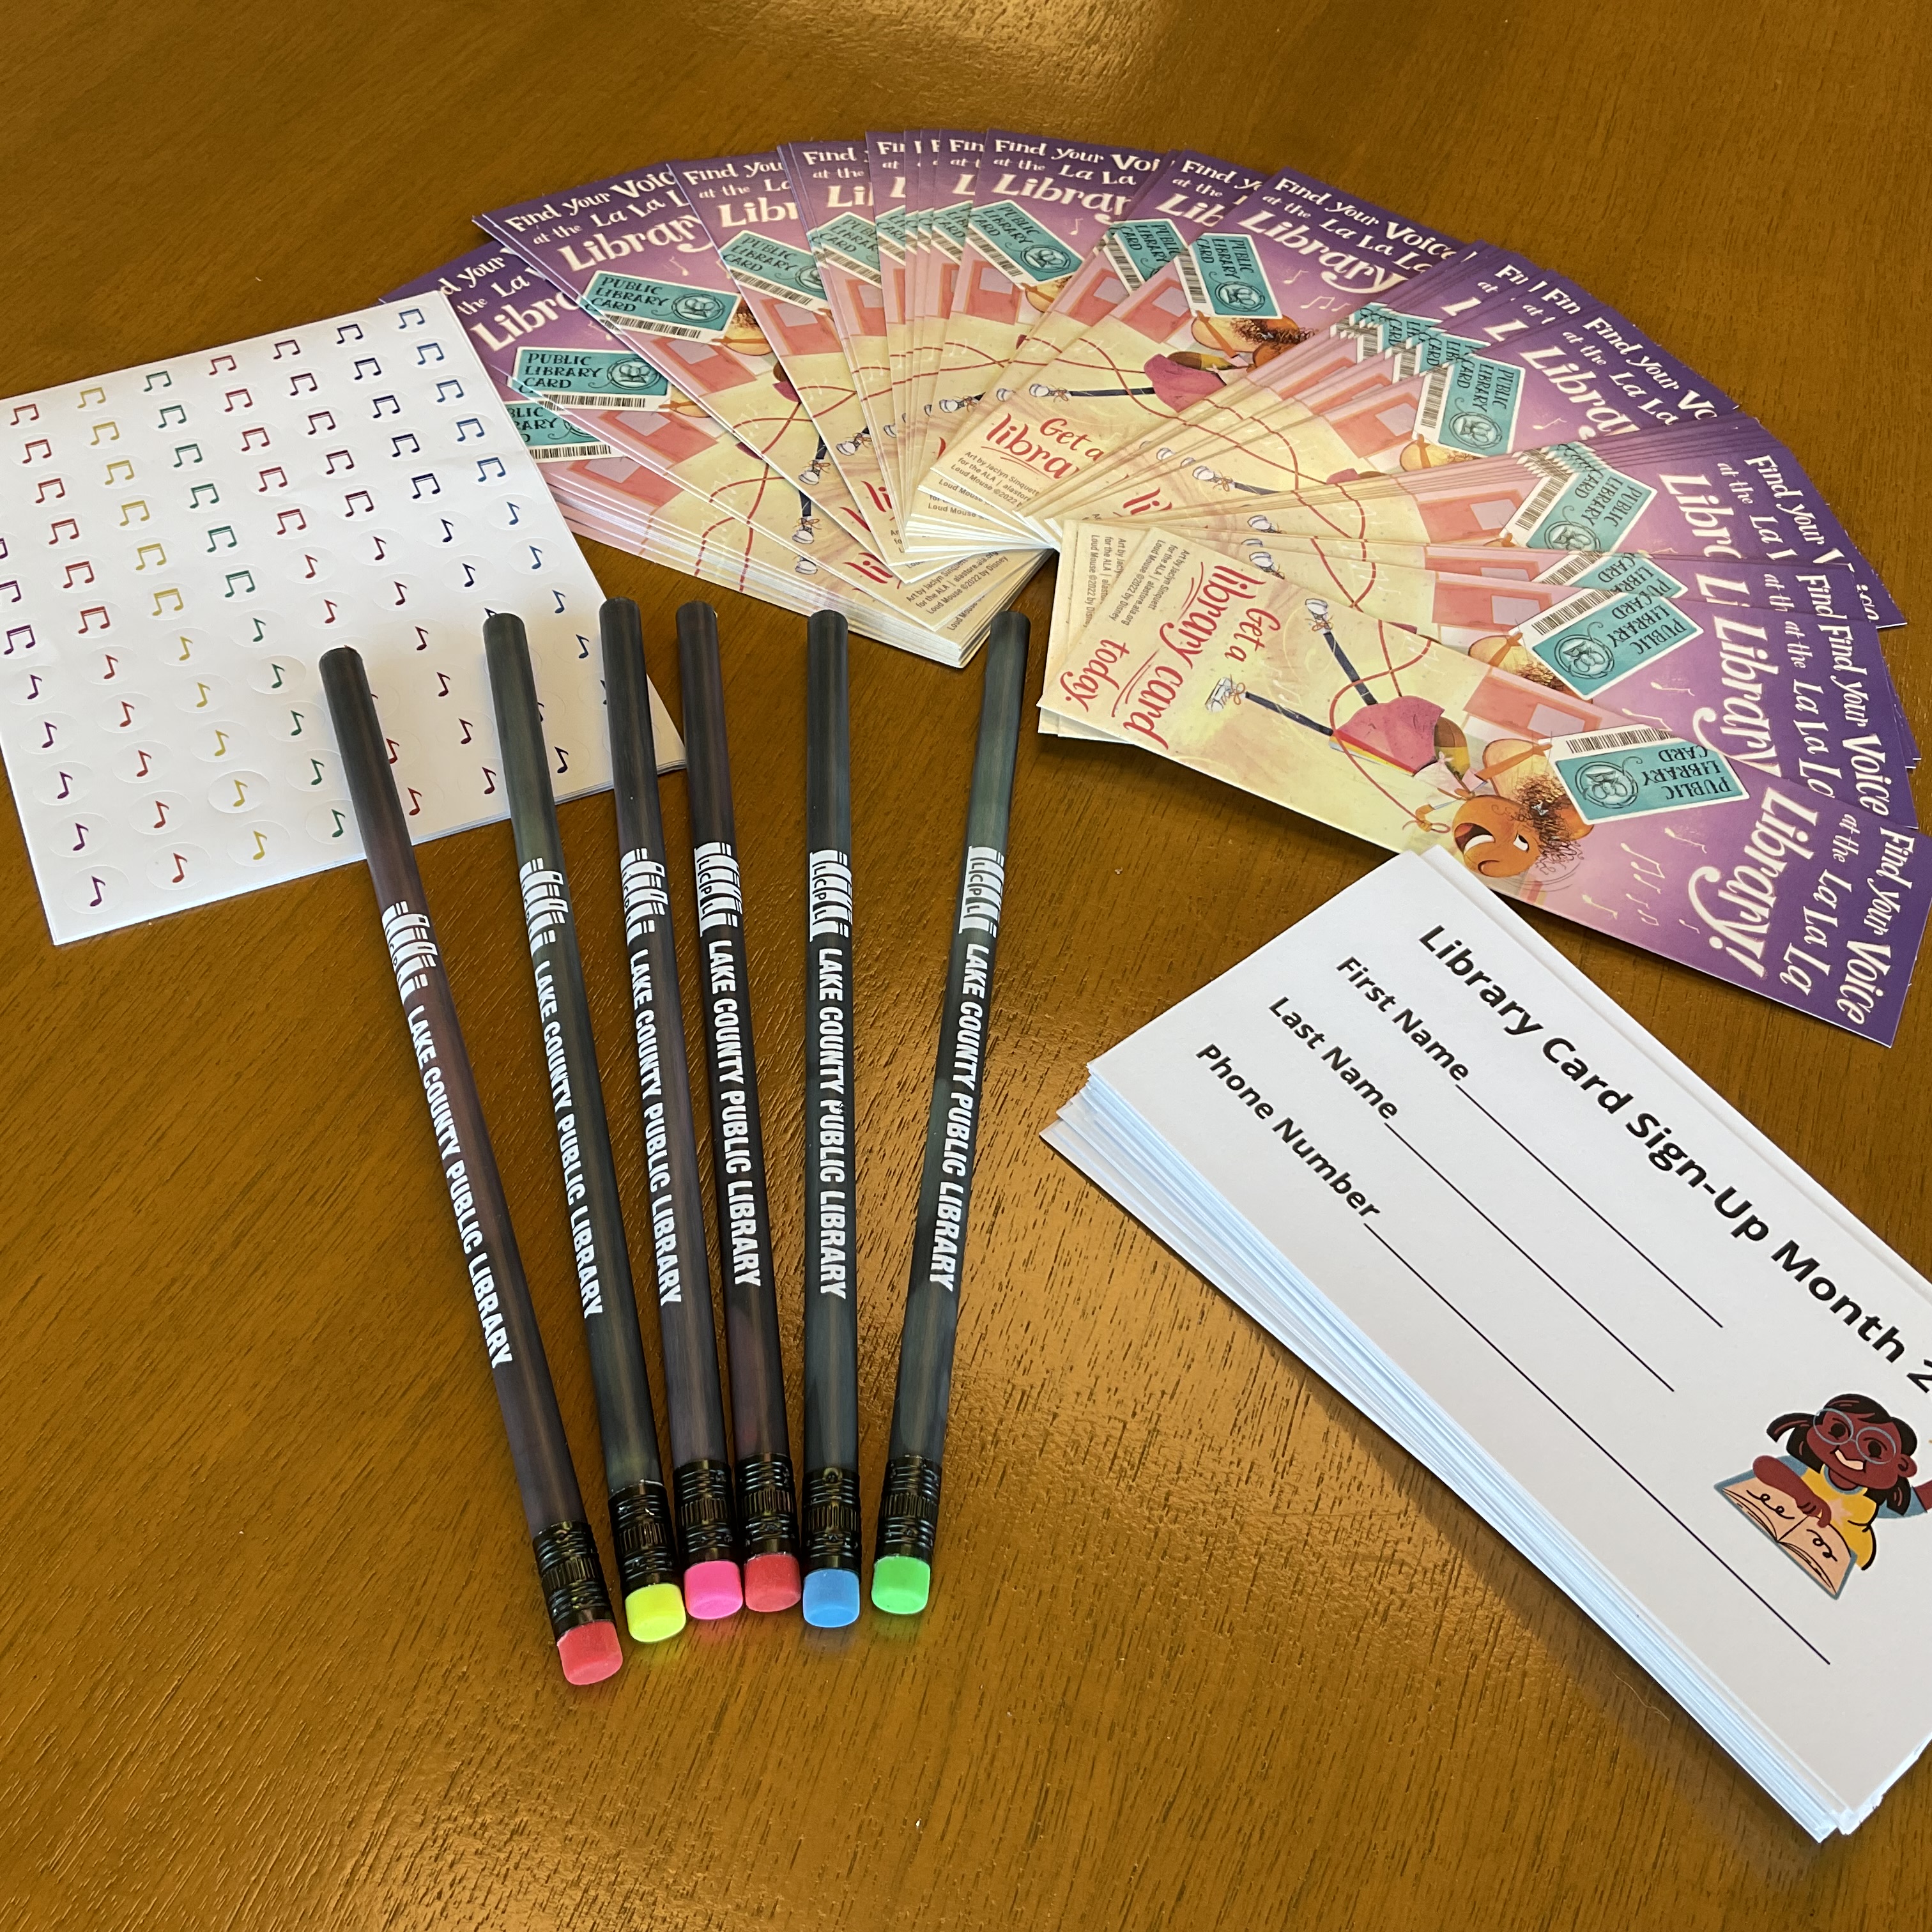 bookmarks, stickers, pencils, and raffle tickets